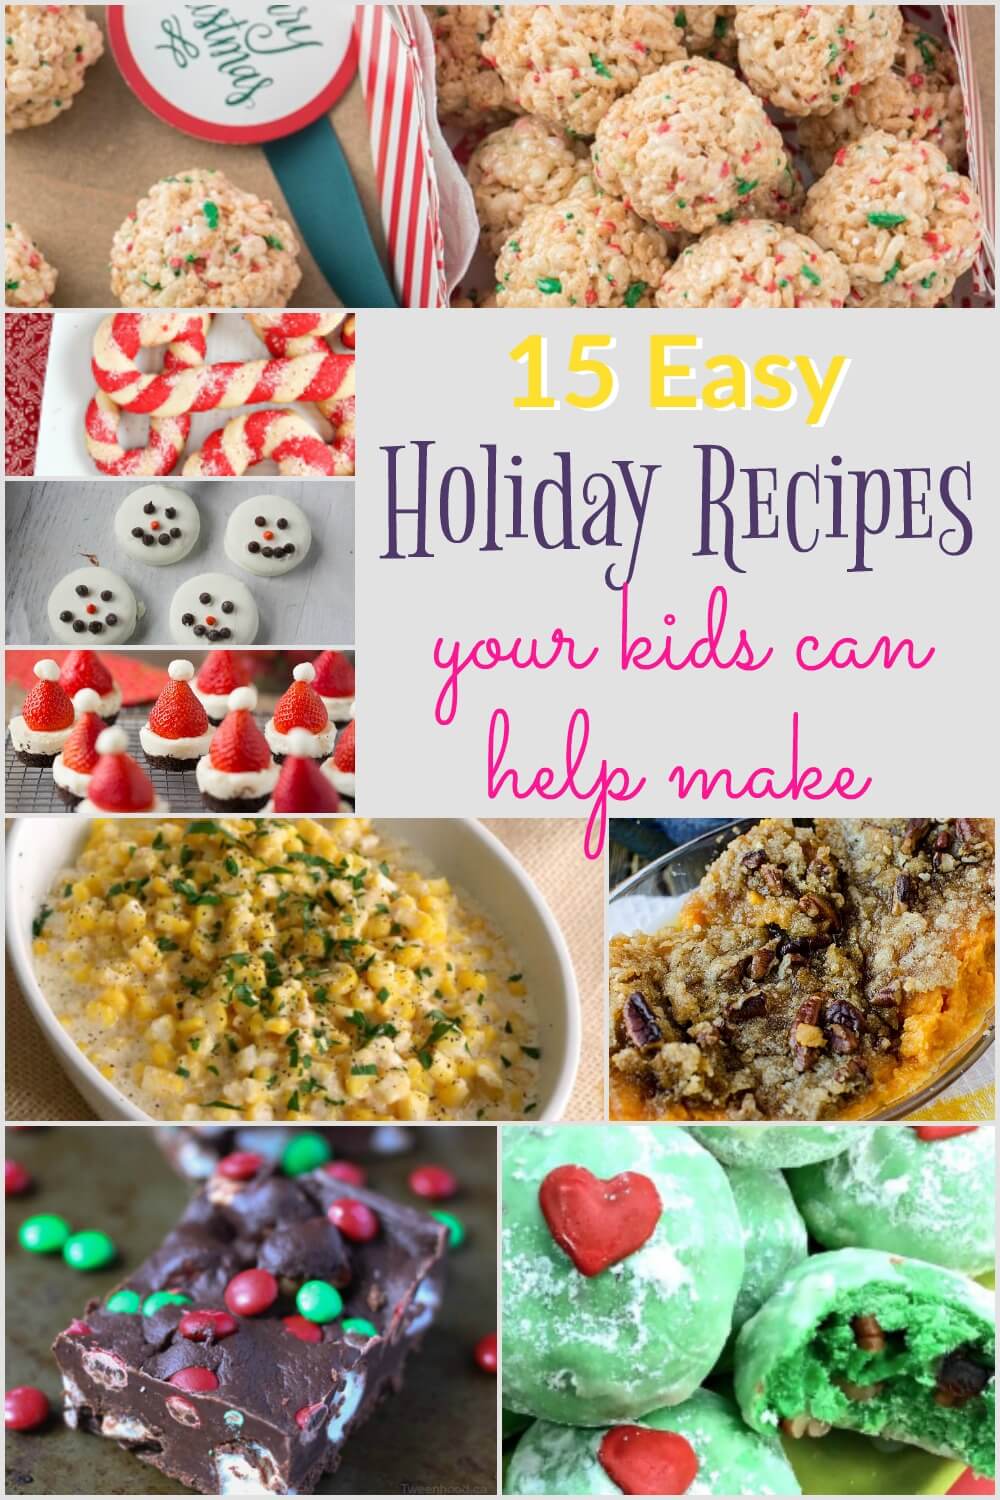 Whether you’re searching for a fun sweet treat to create with your kids or a delicious holiday side or snack that will teach your kids how to cook, there’s something for you on this list. These 15 easy holiday recipes your kids can help make will have your family working together to create something yummy in no time.